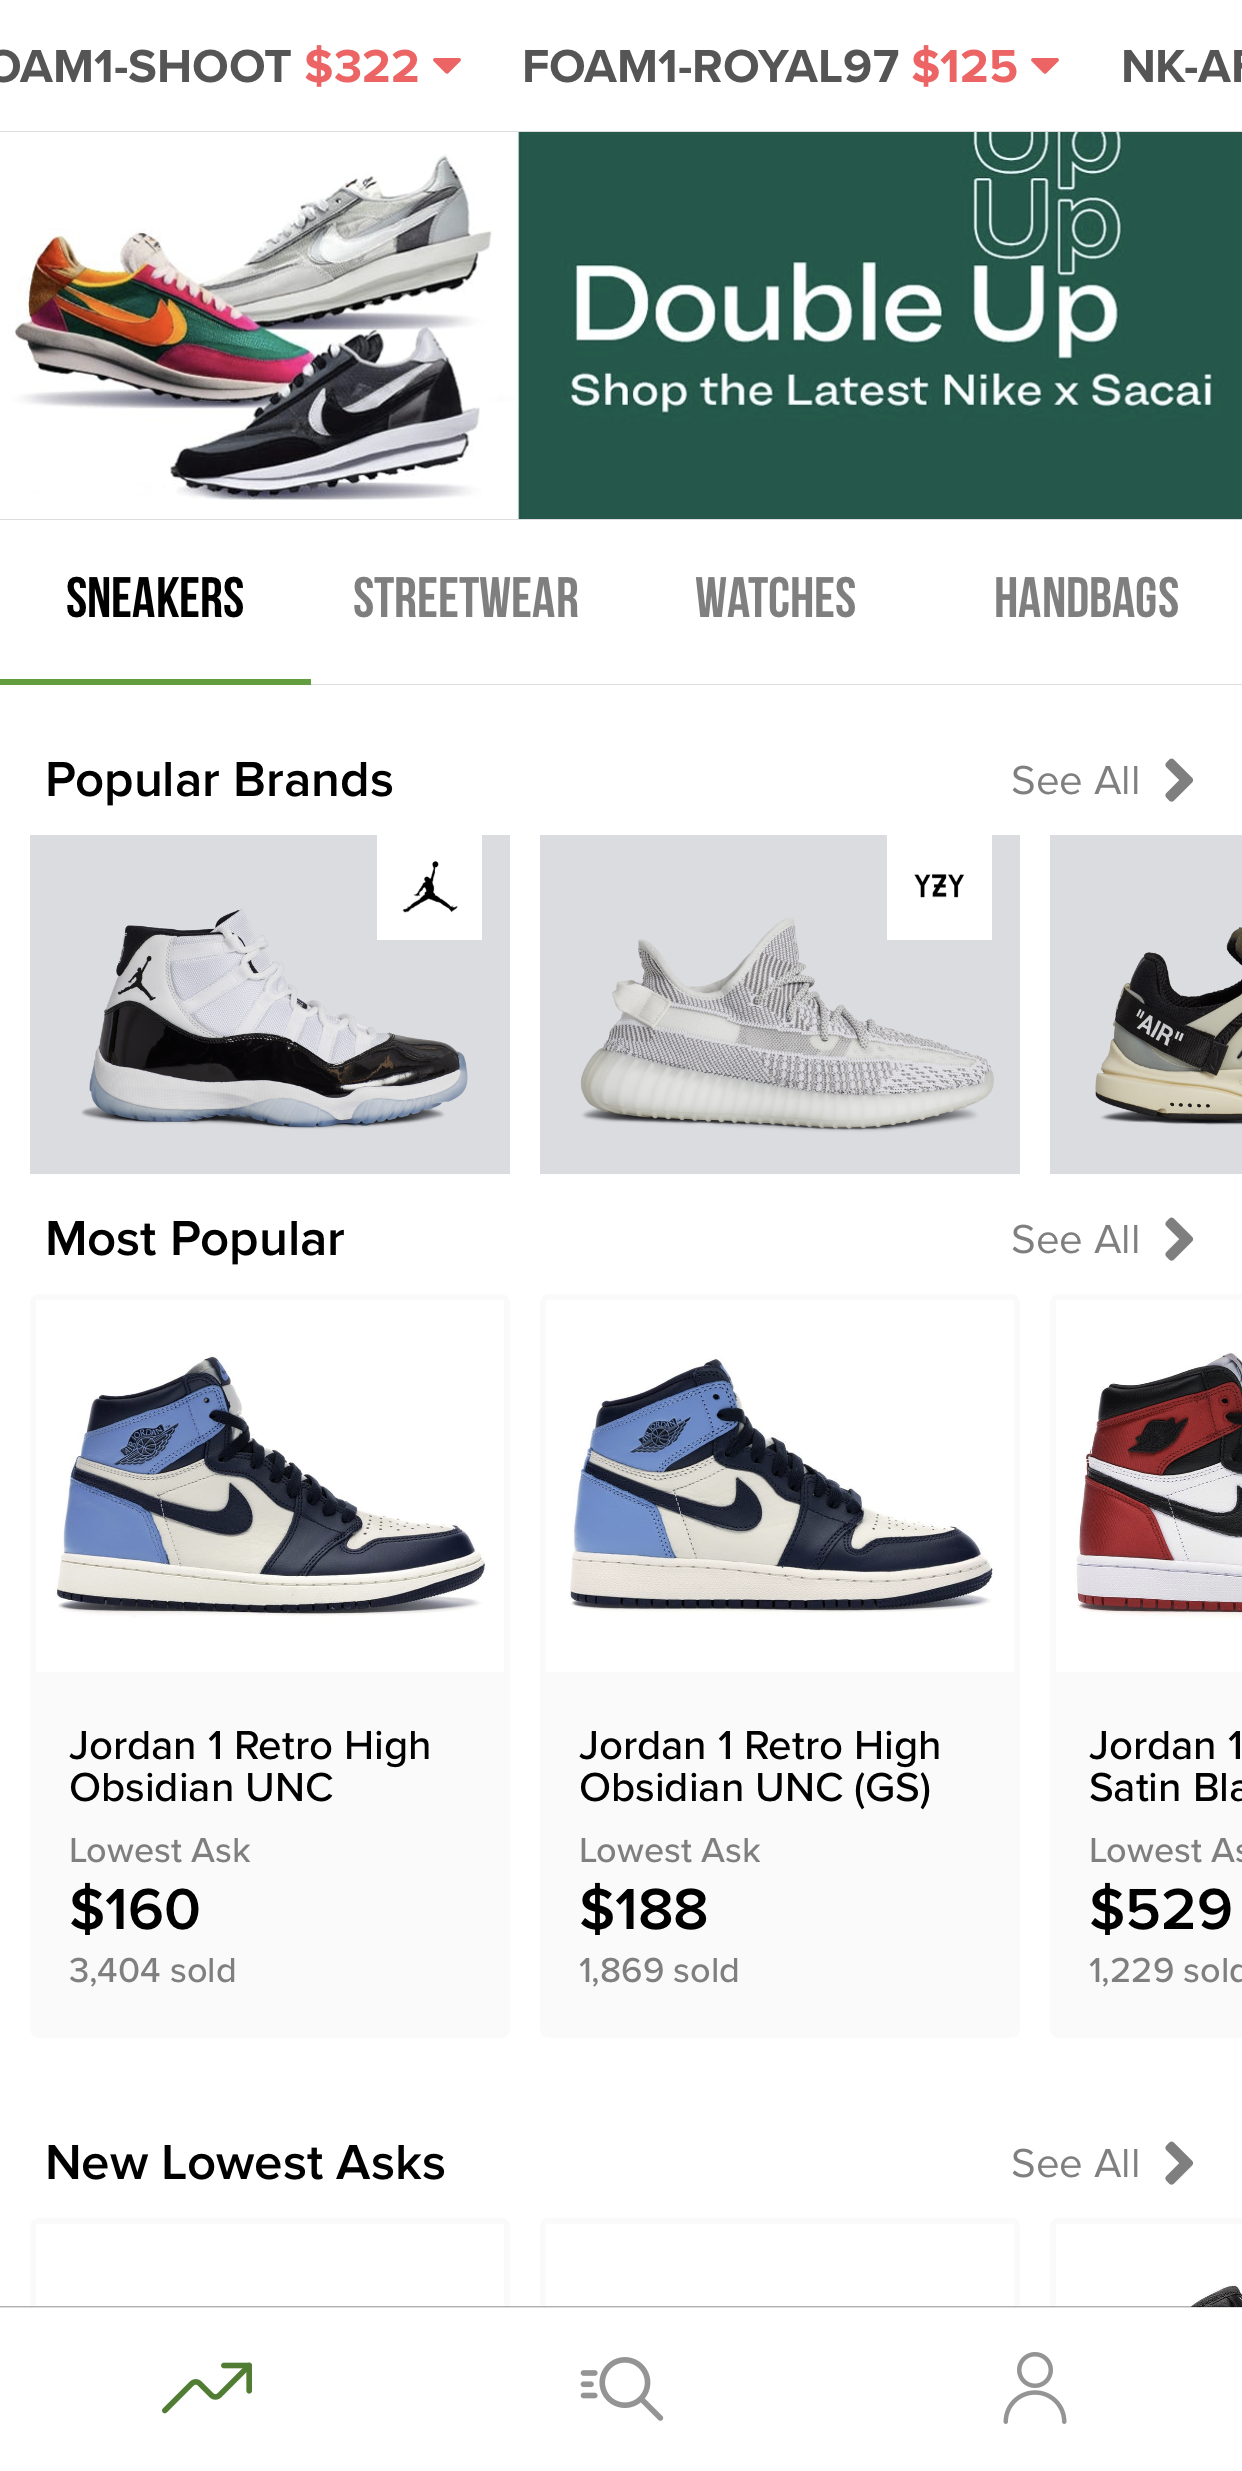 The best apps for buying sneakers and streetwear